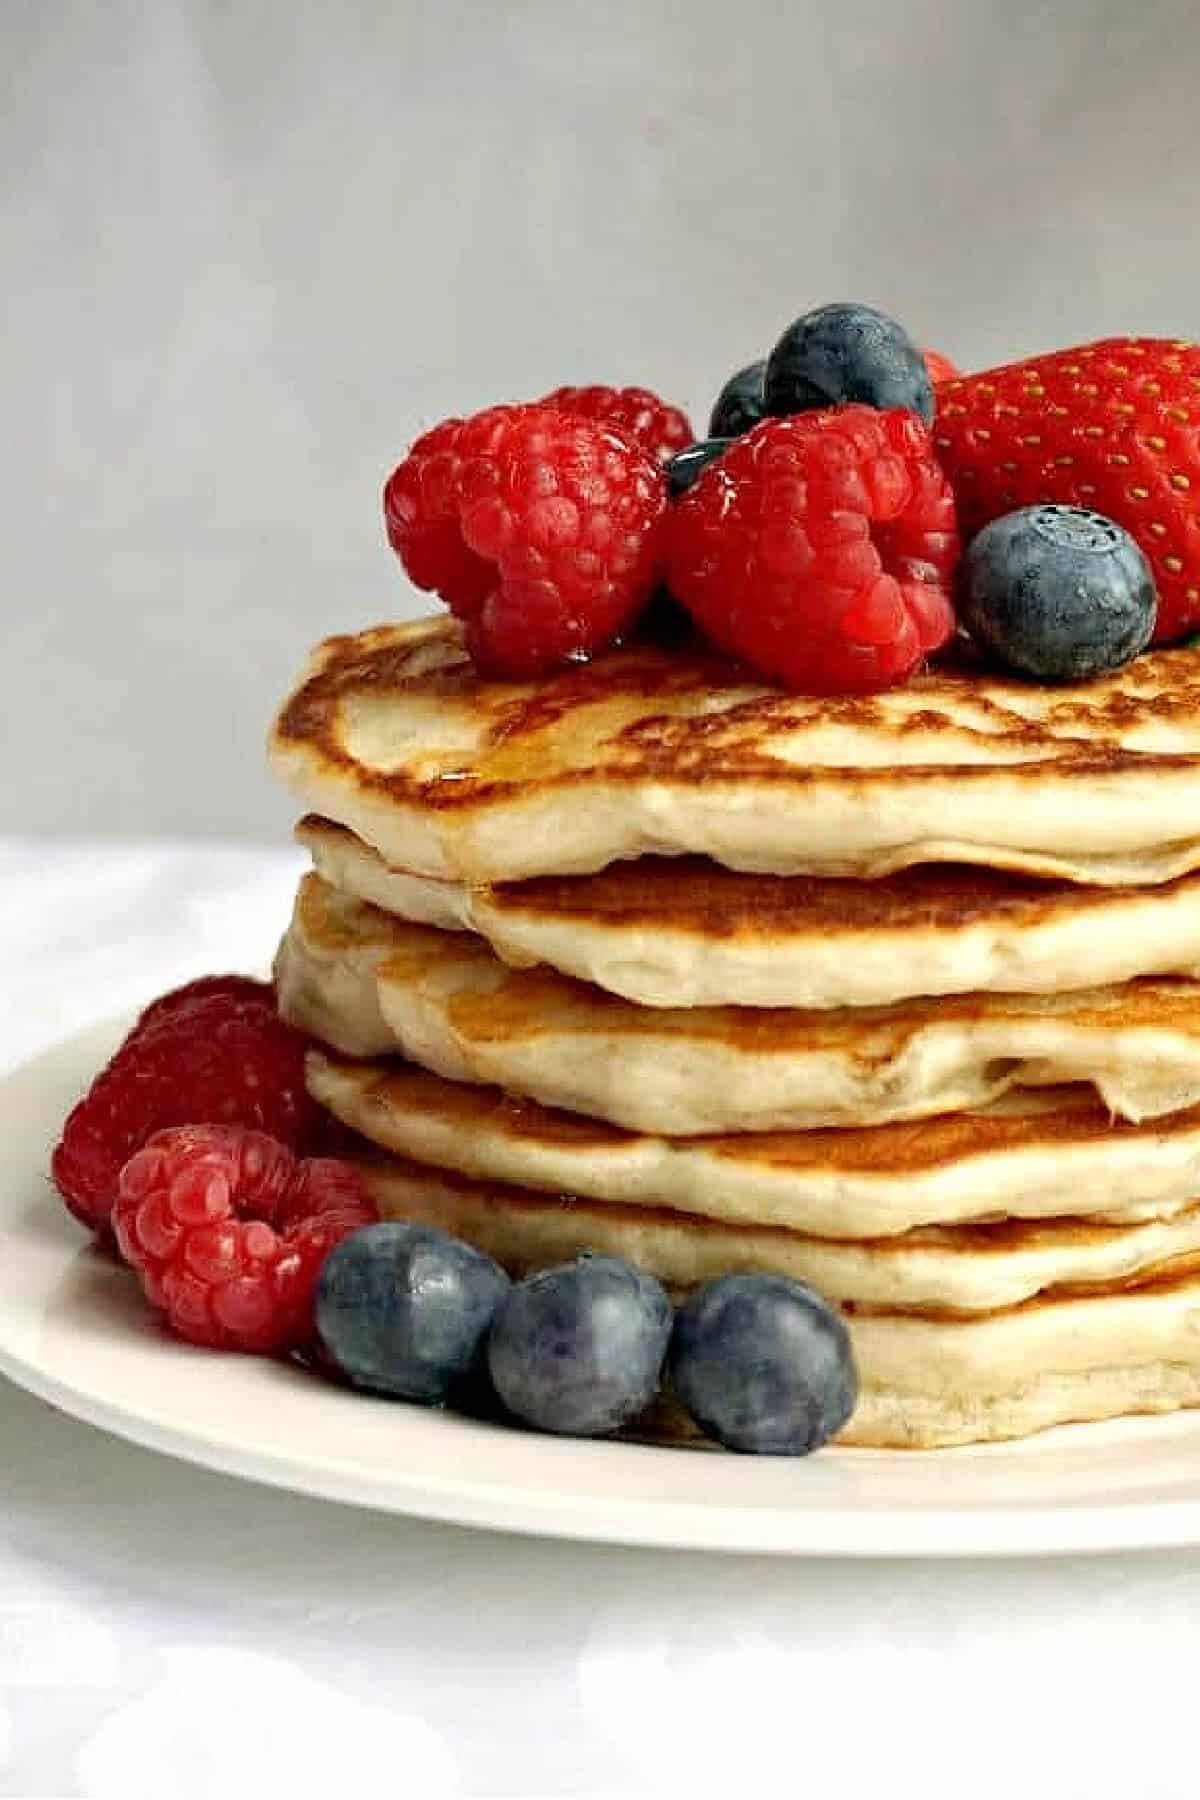 A pile of pancakes with berries around them and on top.